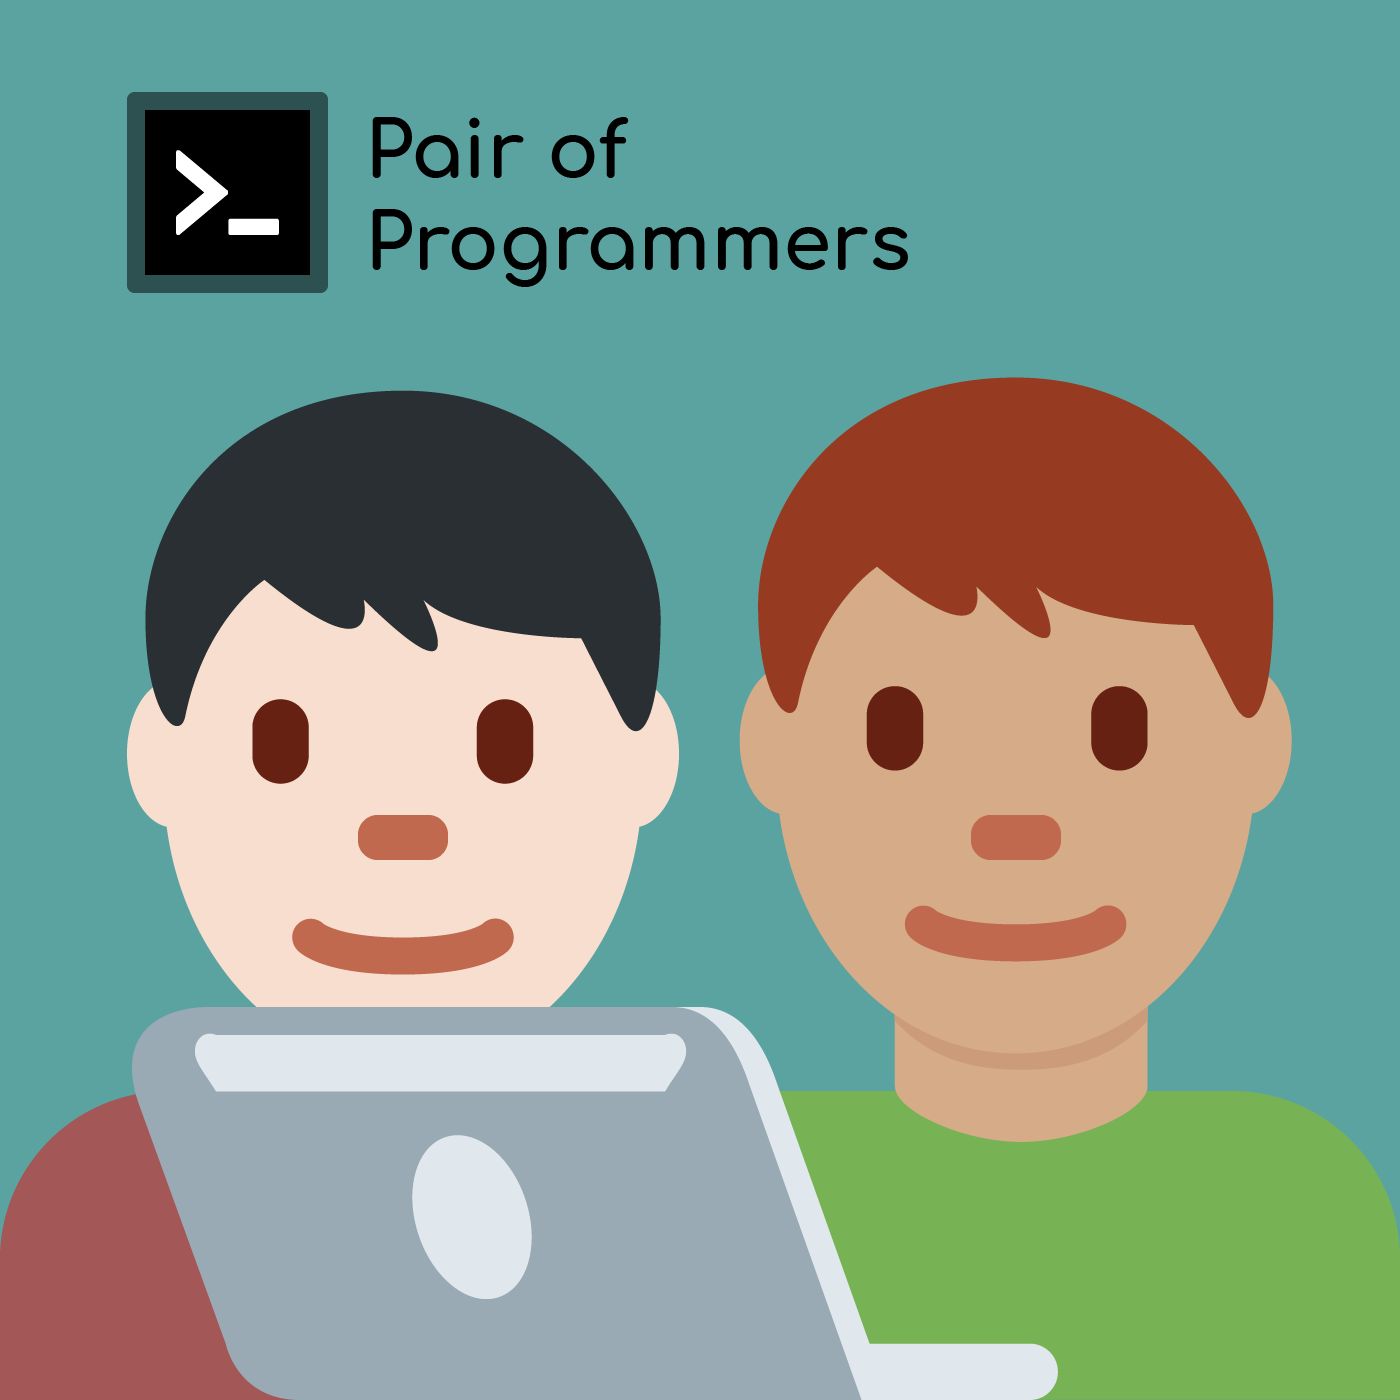 Pair of Programmers